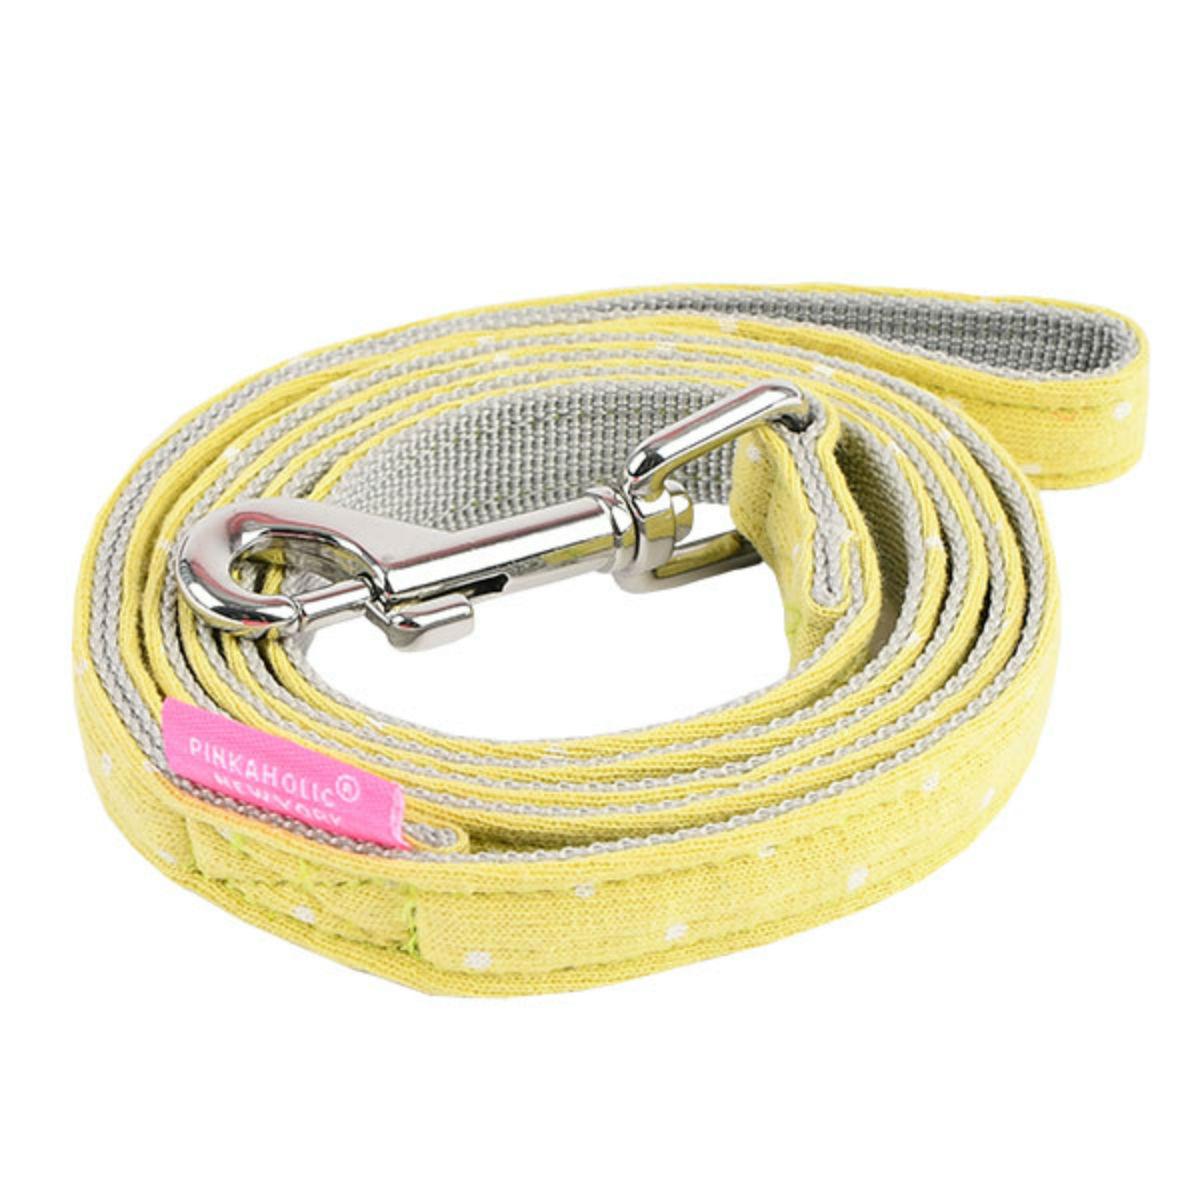 Lalo Dog Leash by Pinkaholic - Lime